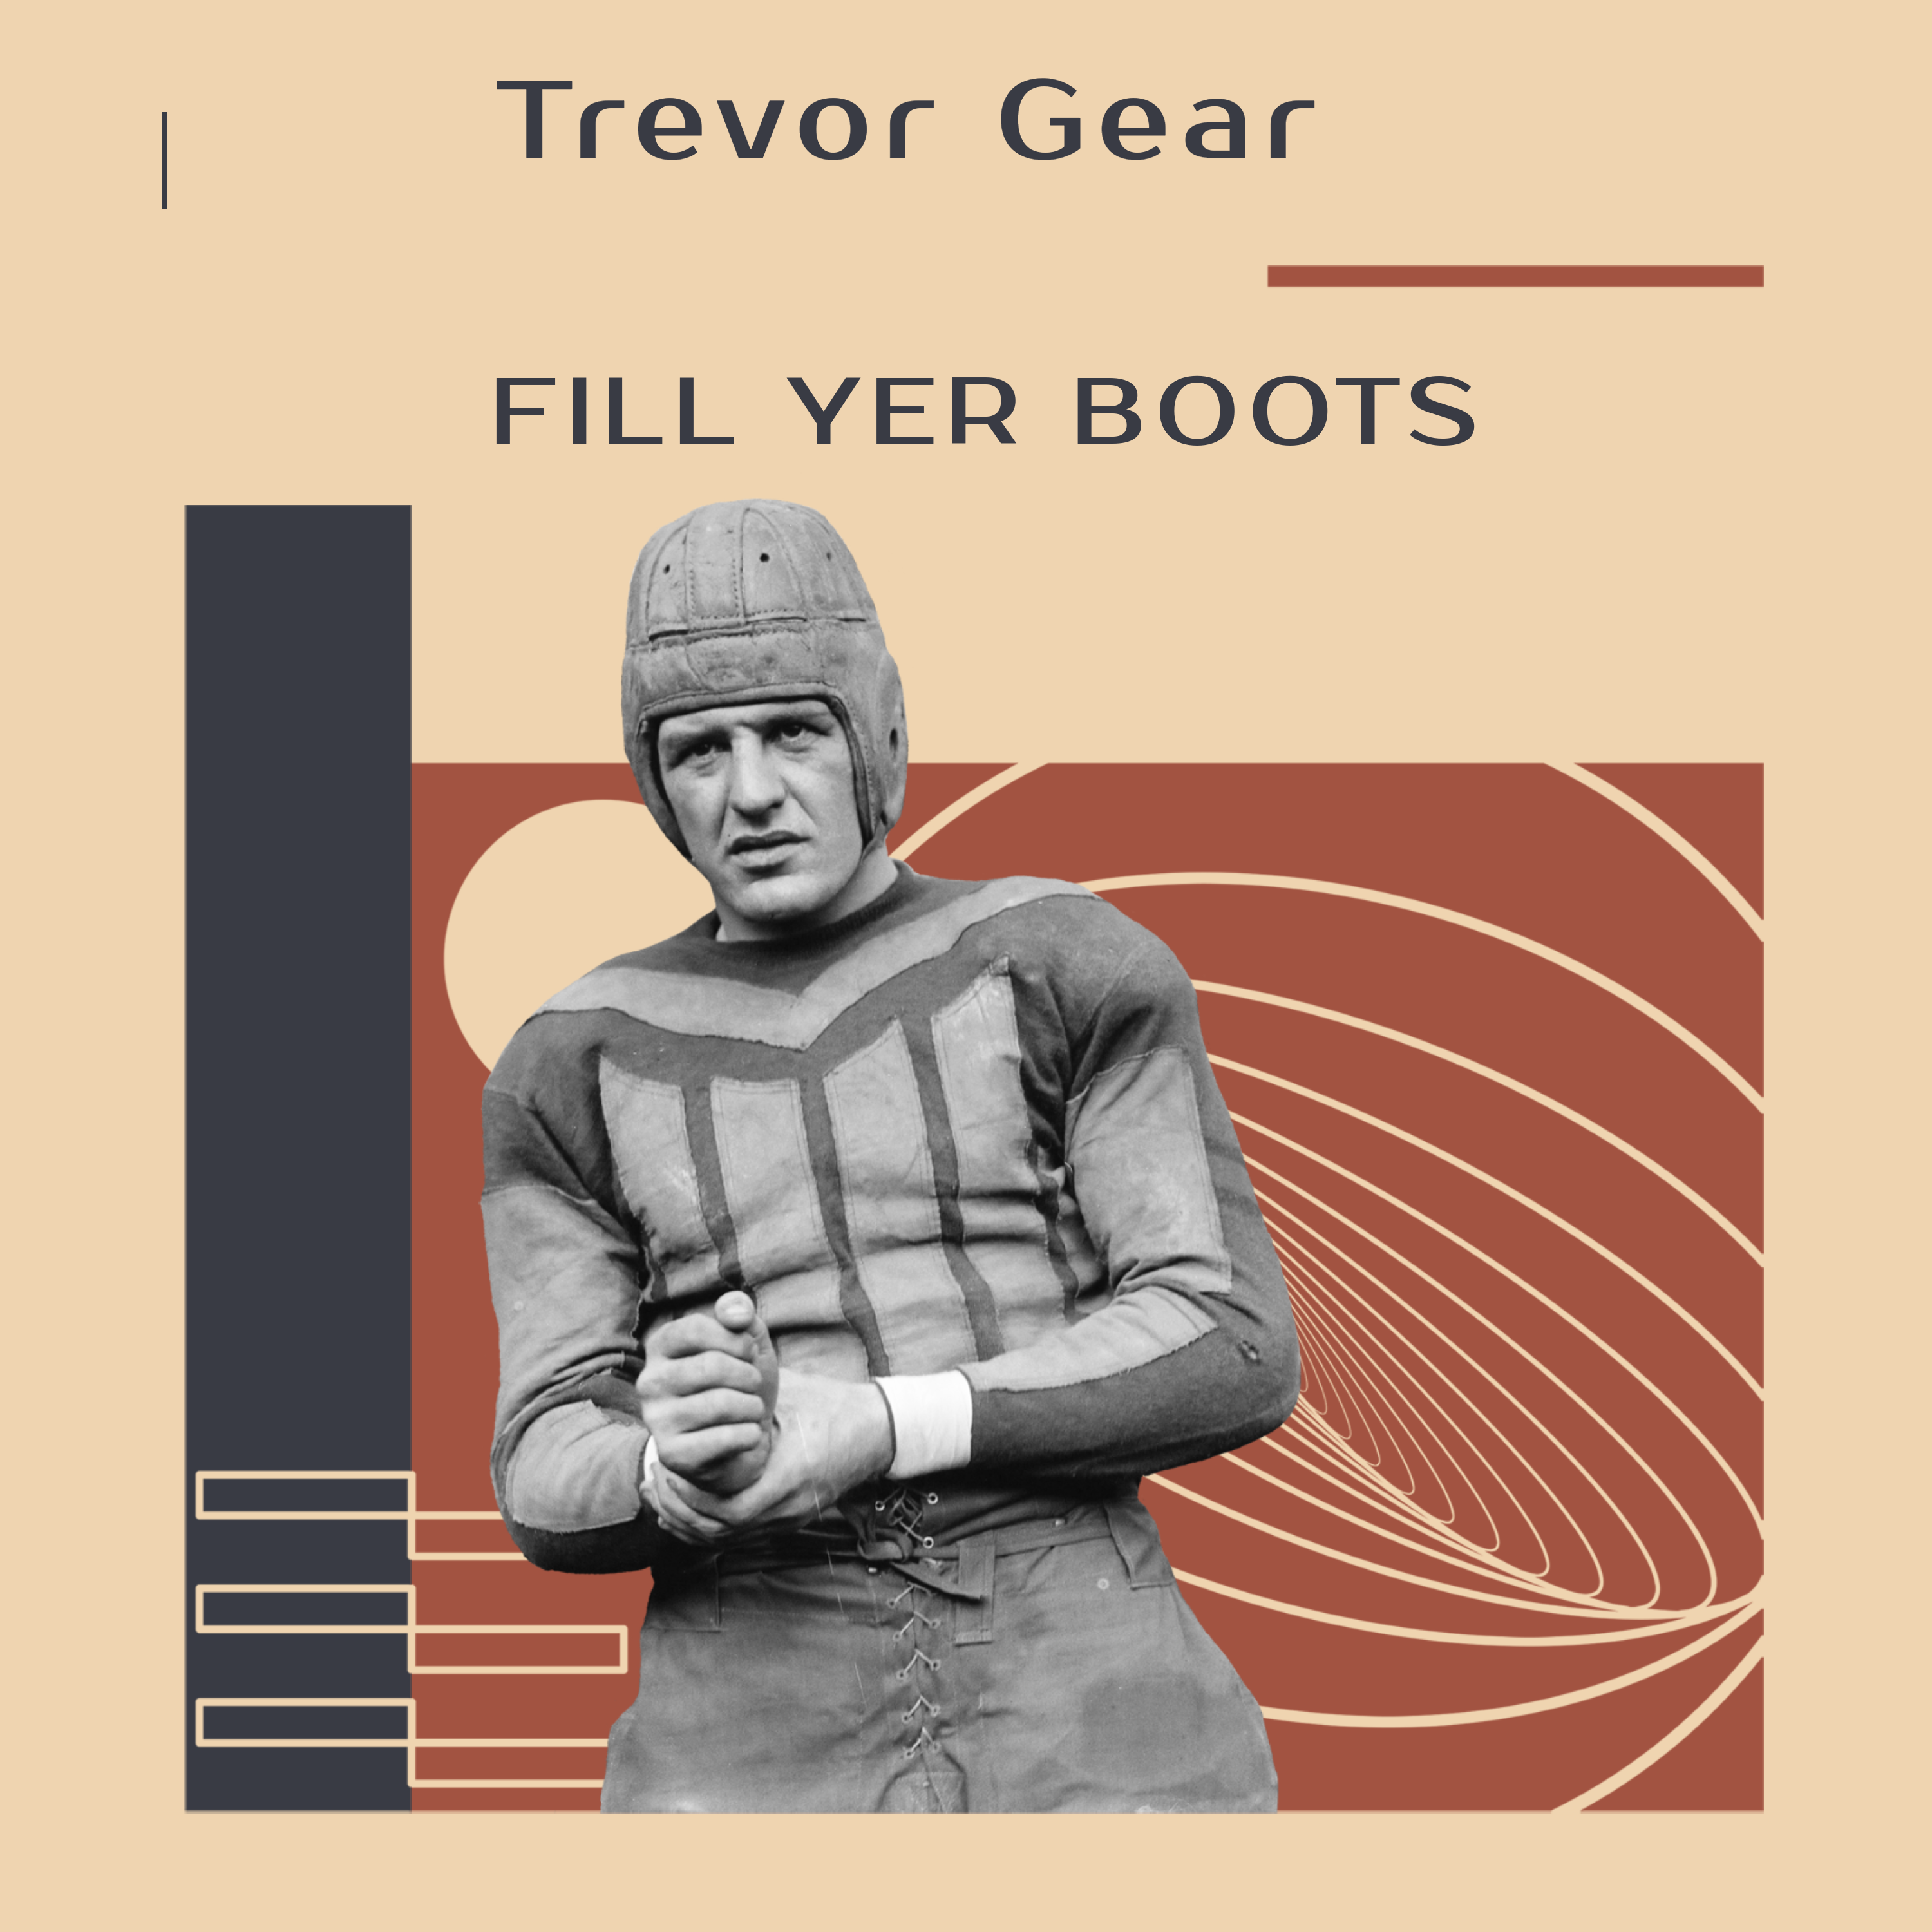 Fill Yer Boots by Trevor Gear